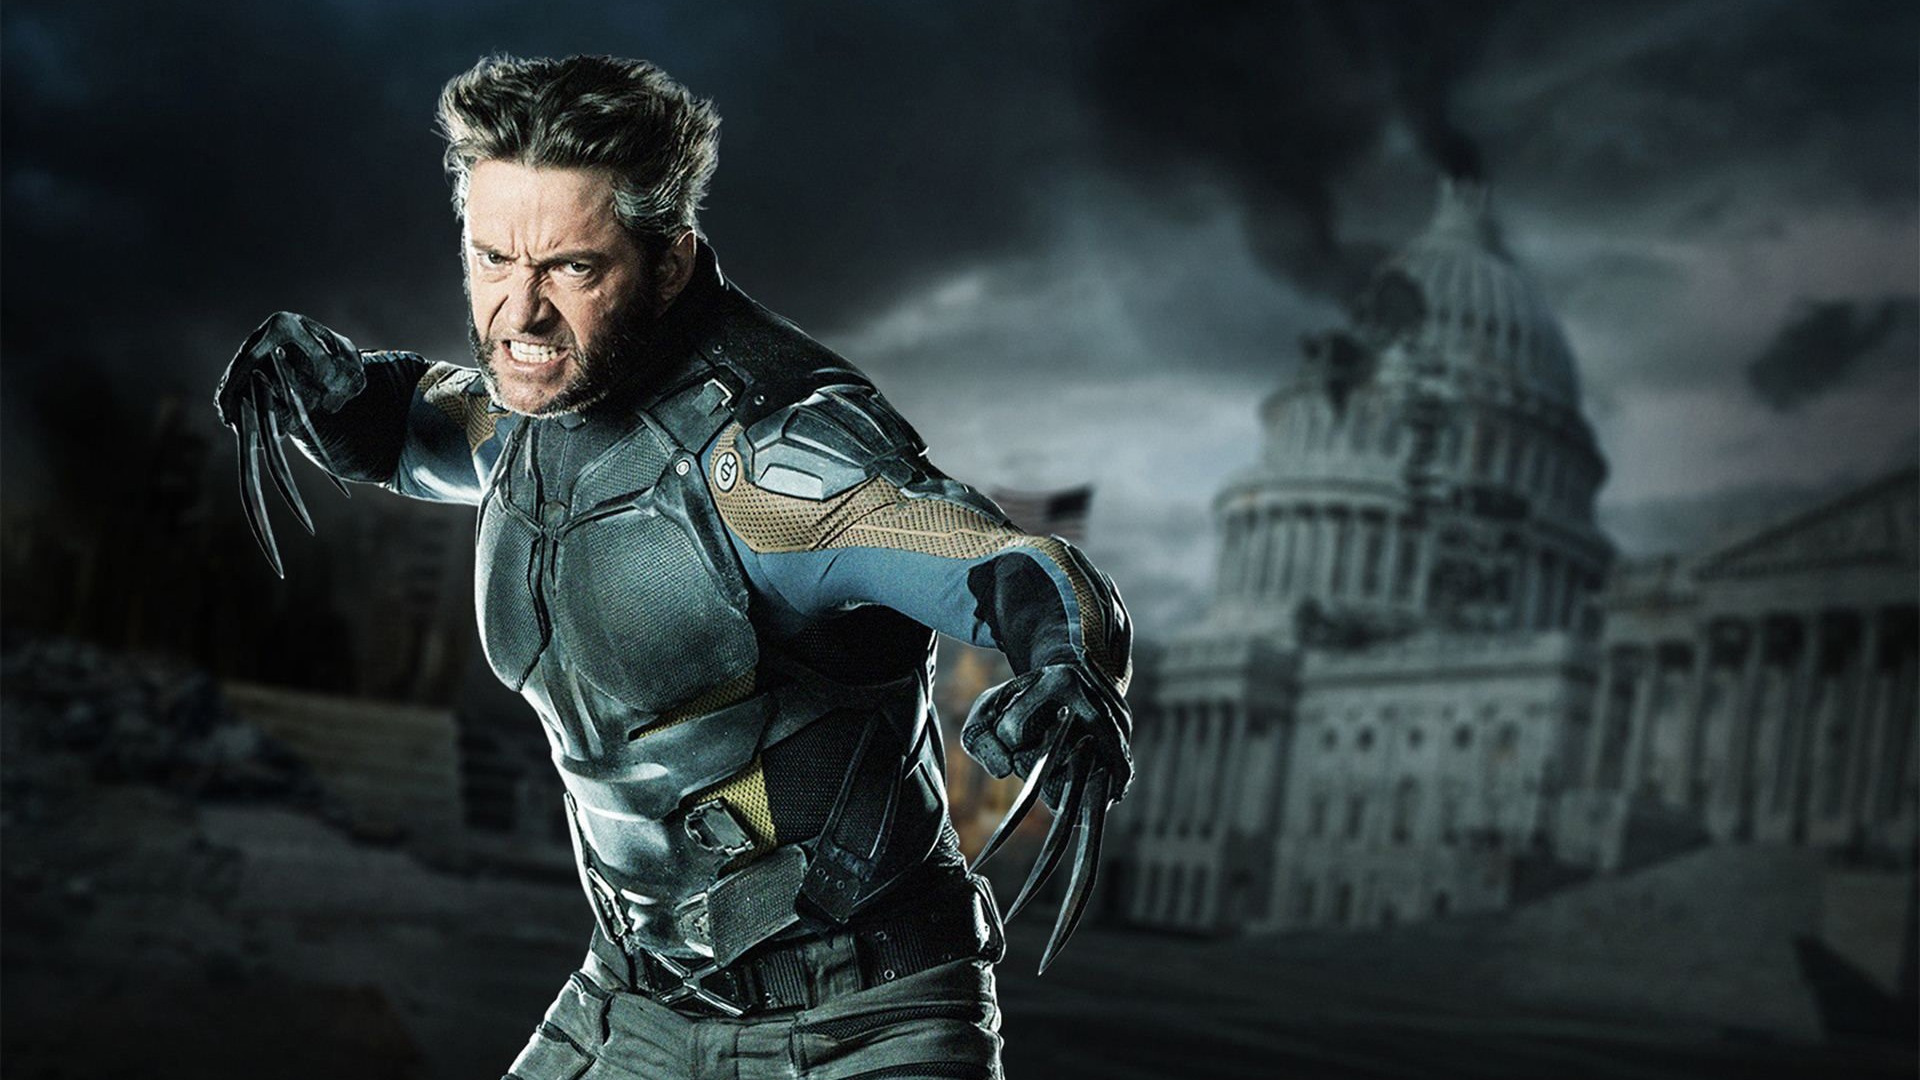 2014 X-Men: Days of Future Past HD wallpapers #19 - 1920x1080